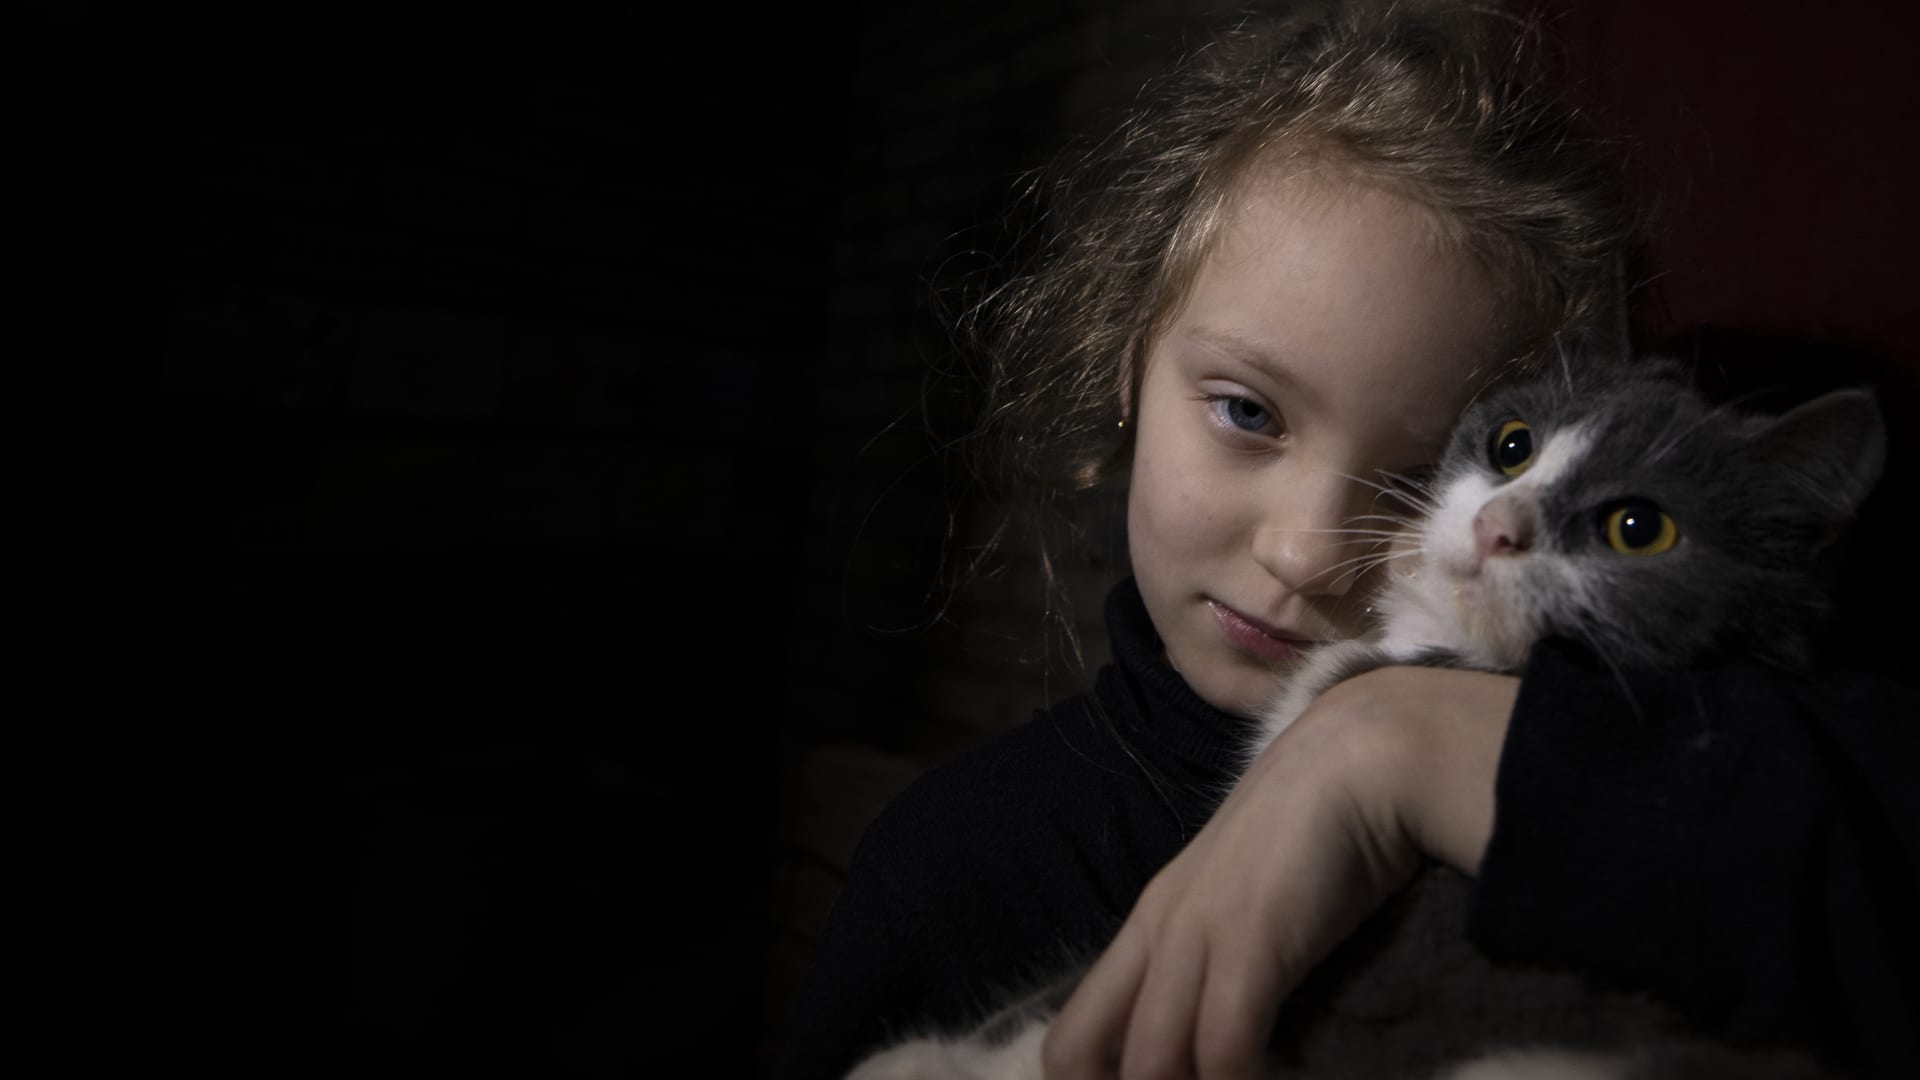 DONETSK OBLAST, UKRAINE - JANUARY 25: Anya, 7, hugs her cat in the shelter where she lives with her family amid the war in Donetsk Oblast, Ukraine on January 25, 2023. (Photo by Mustafa Ciftci/Anadolu Agency via Getty Images)